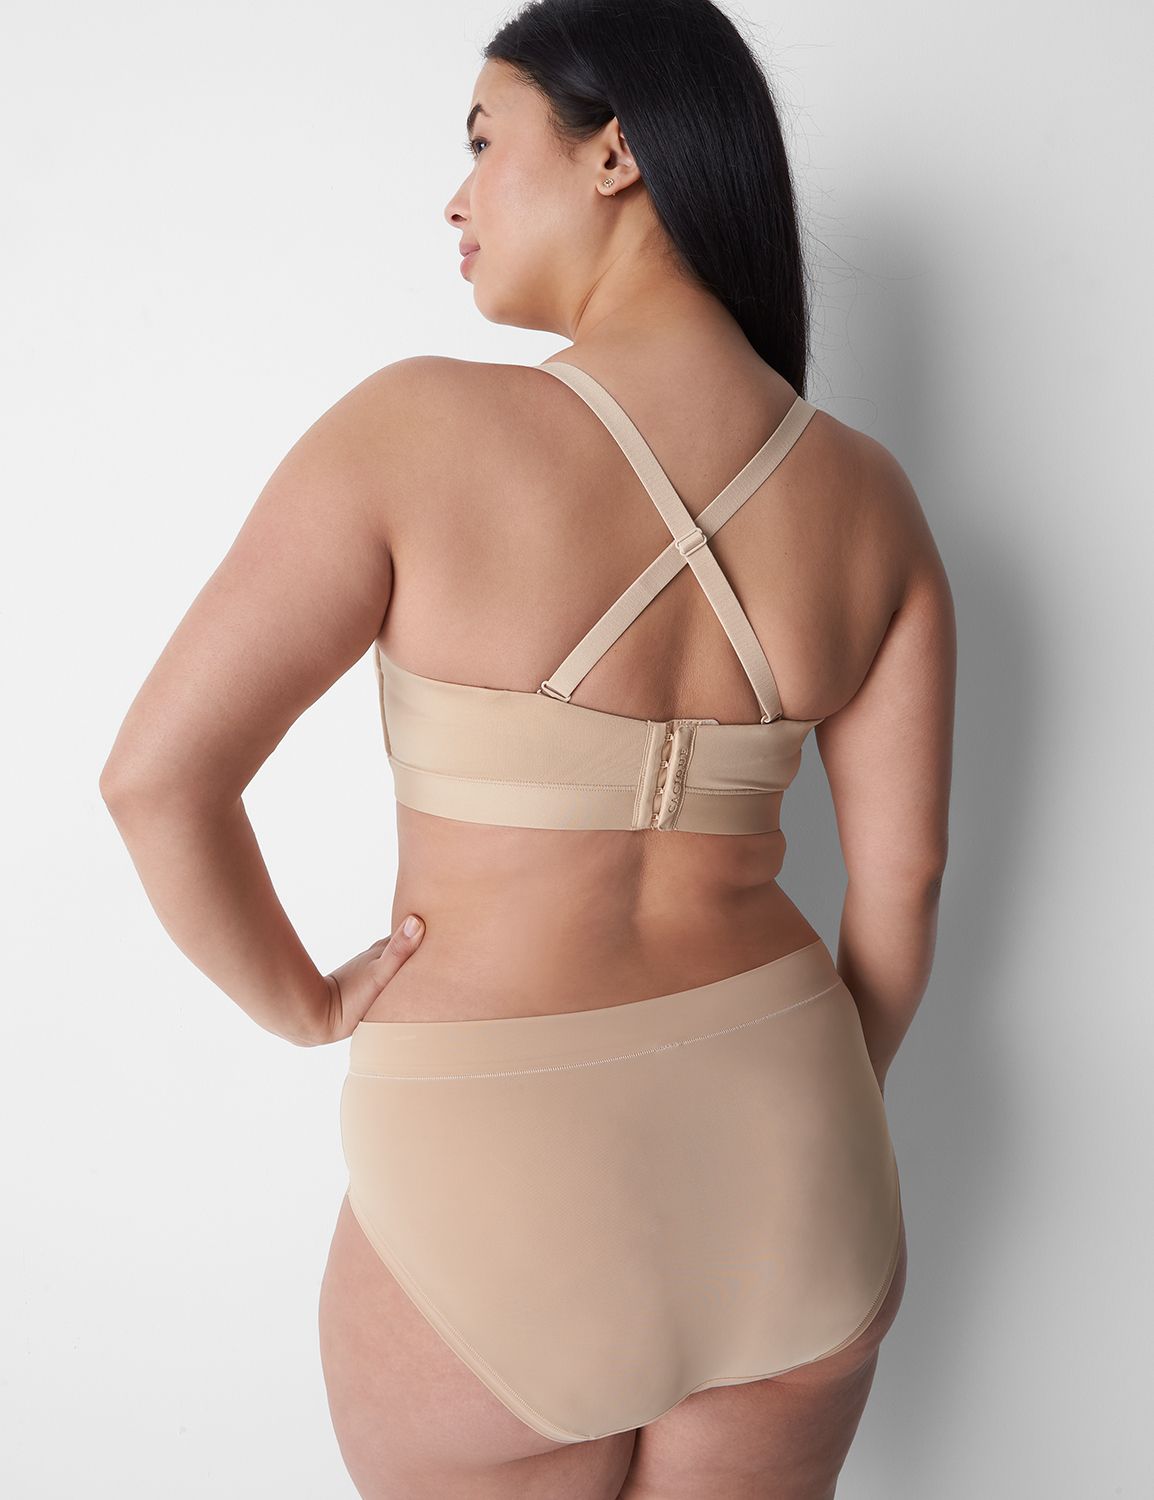 Lane Bryant - The name says it all with our fan-fave Comfort Bliss